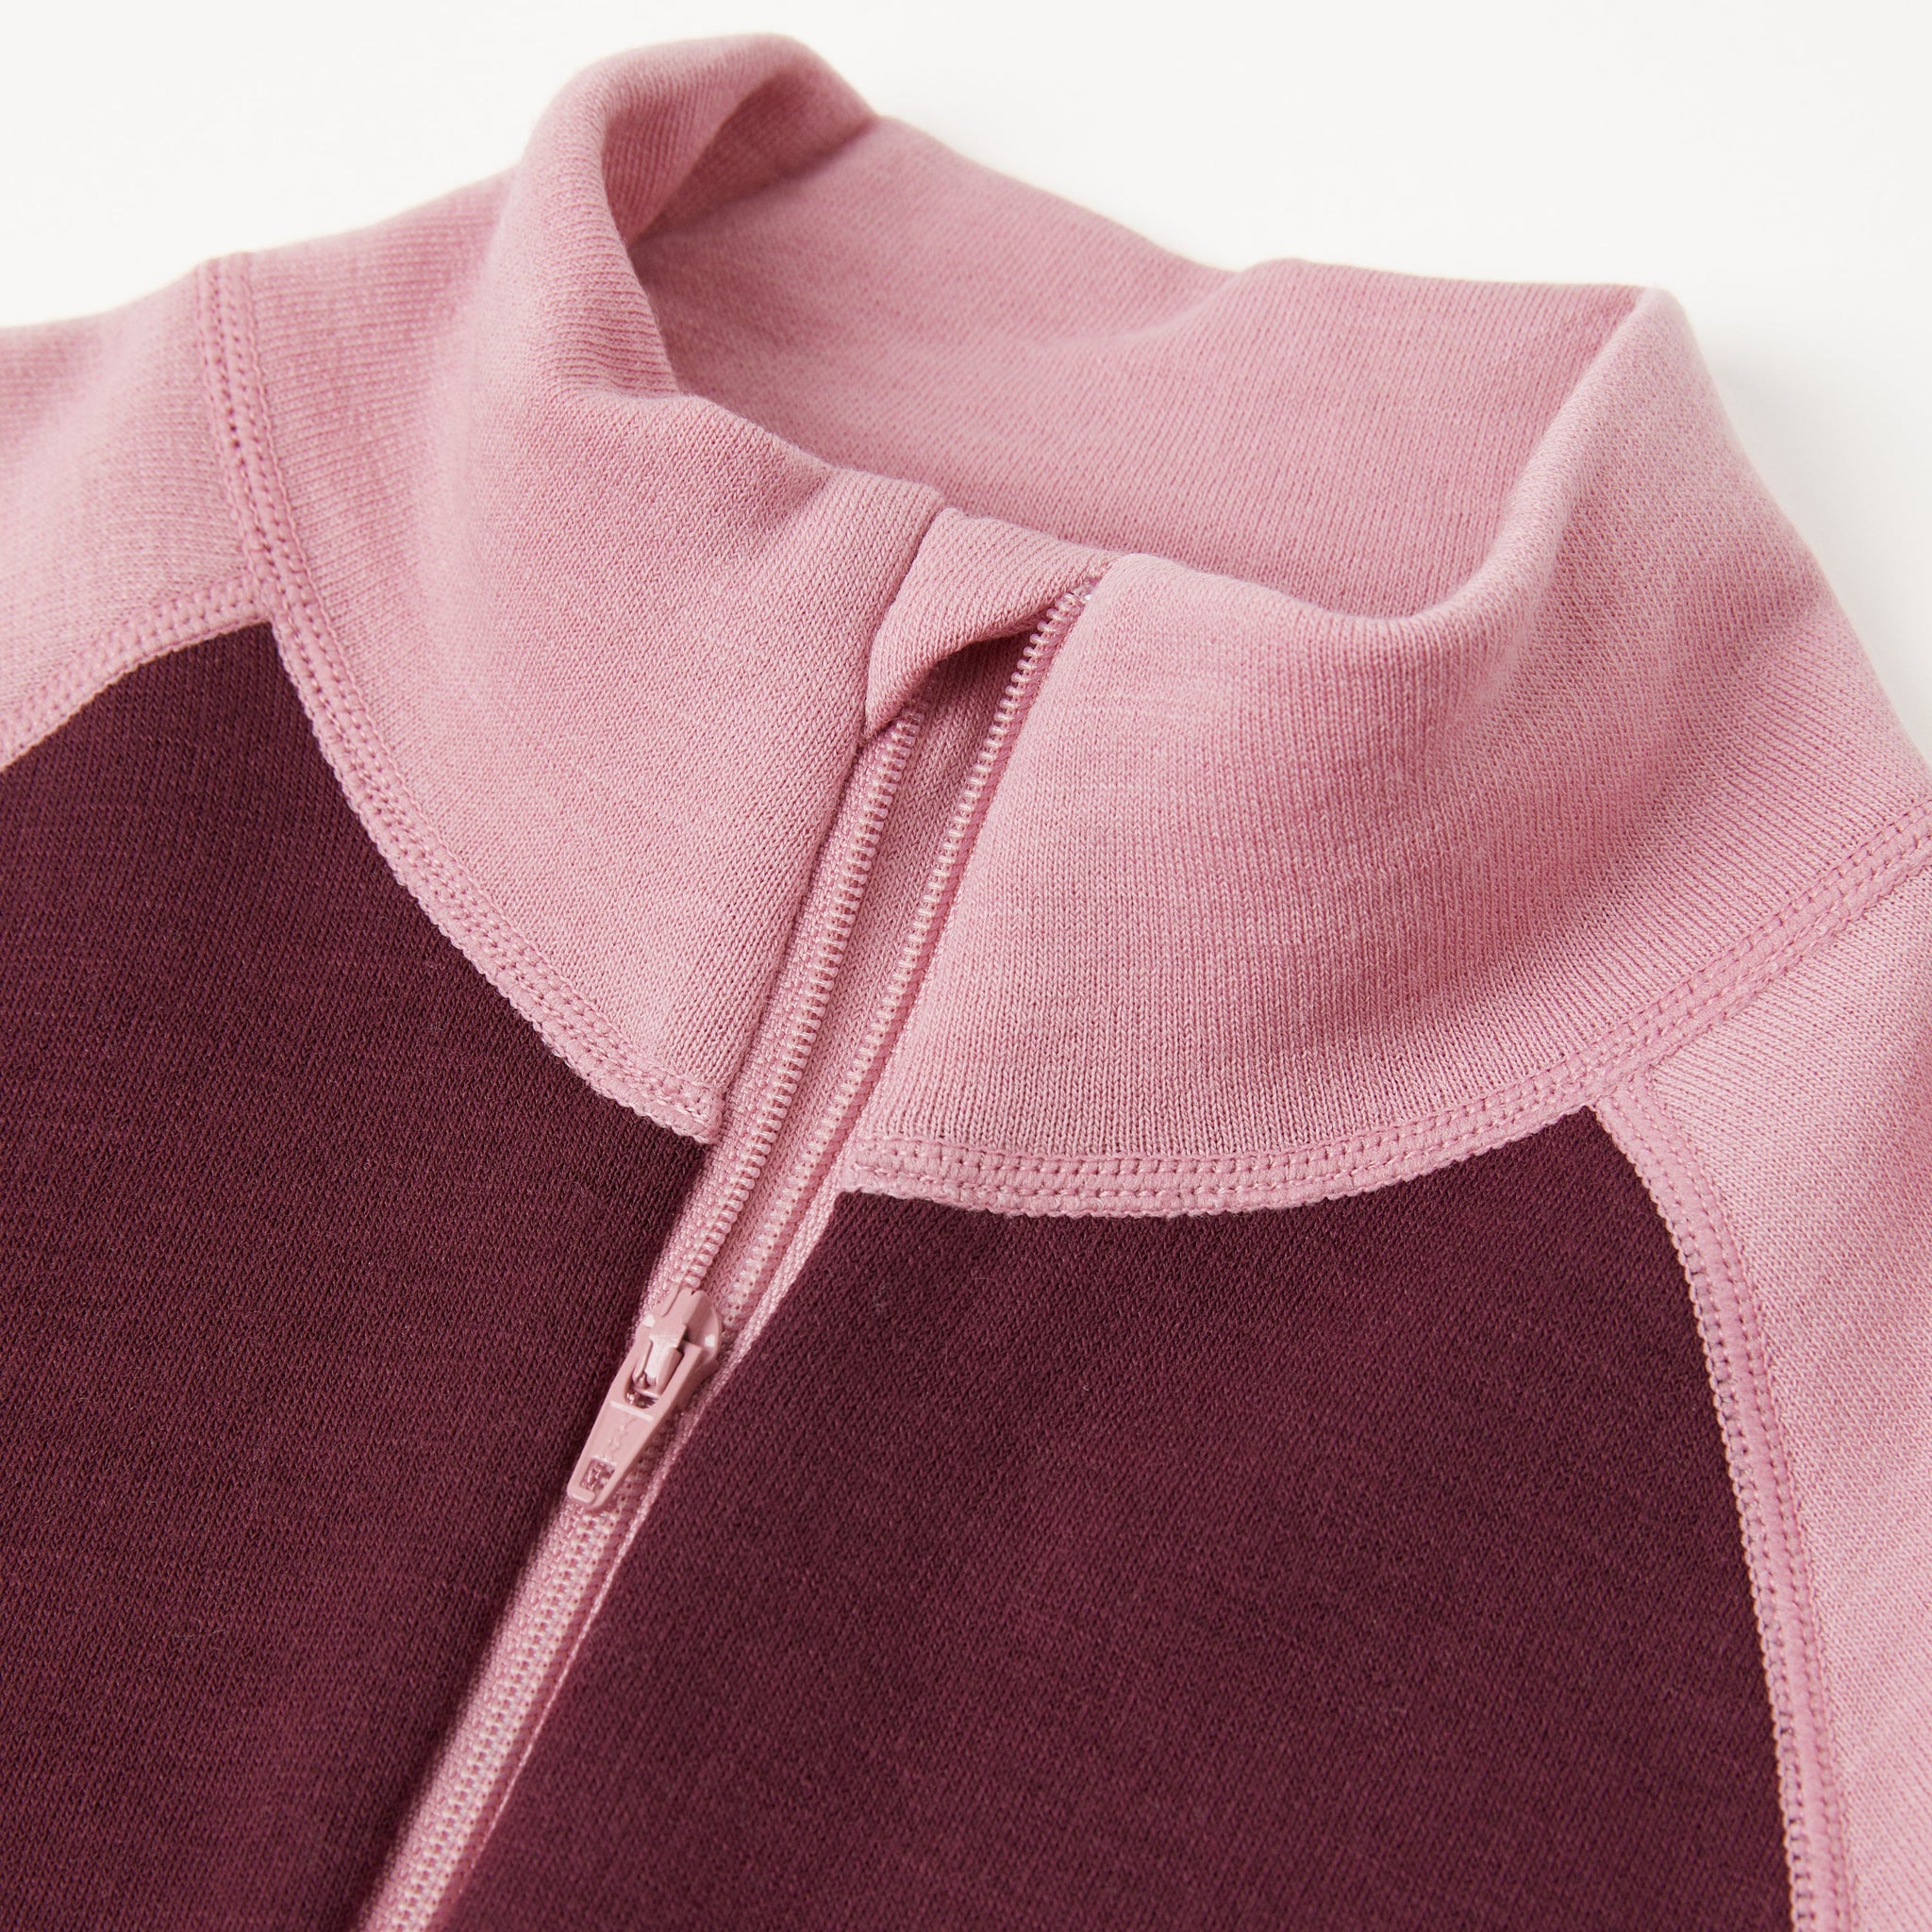 Merino Thermal Burgundy Kids Jumper from the Polarn O. Pyret kidswear collection. Made from sustainable sources.